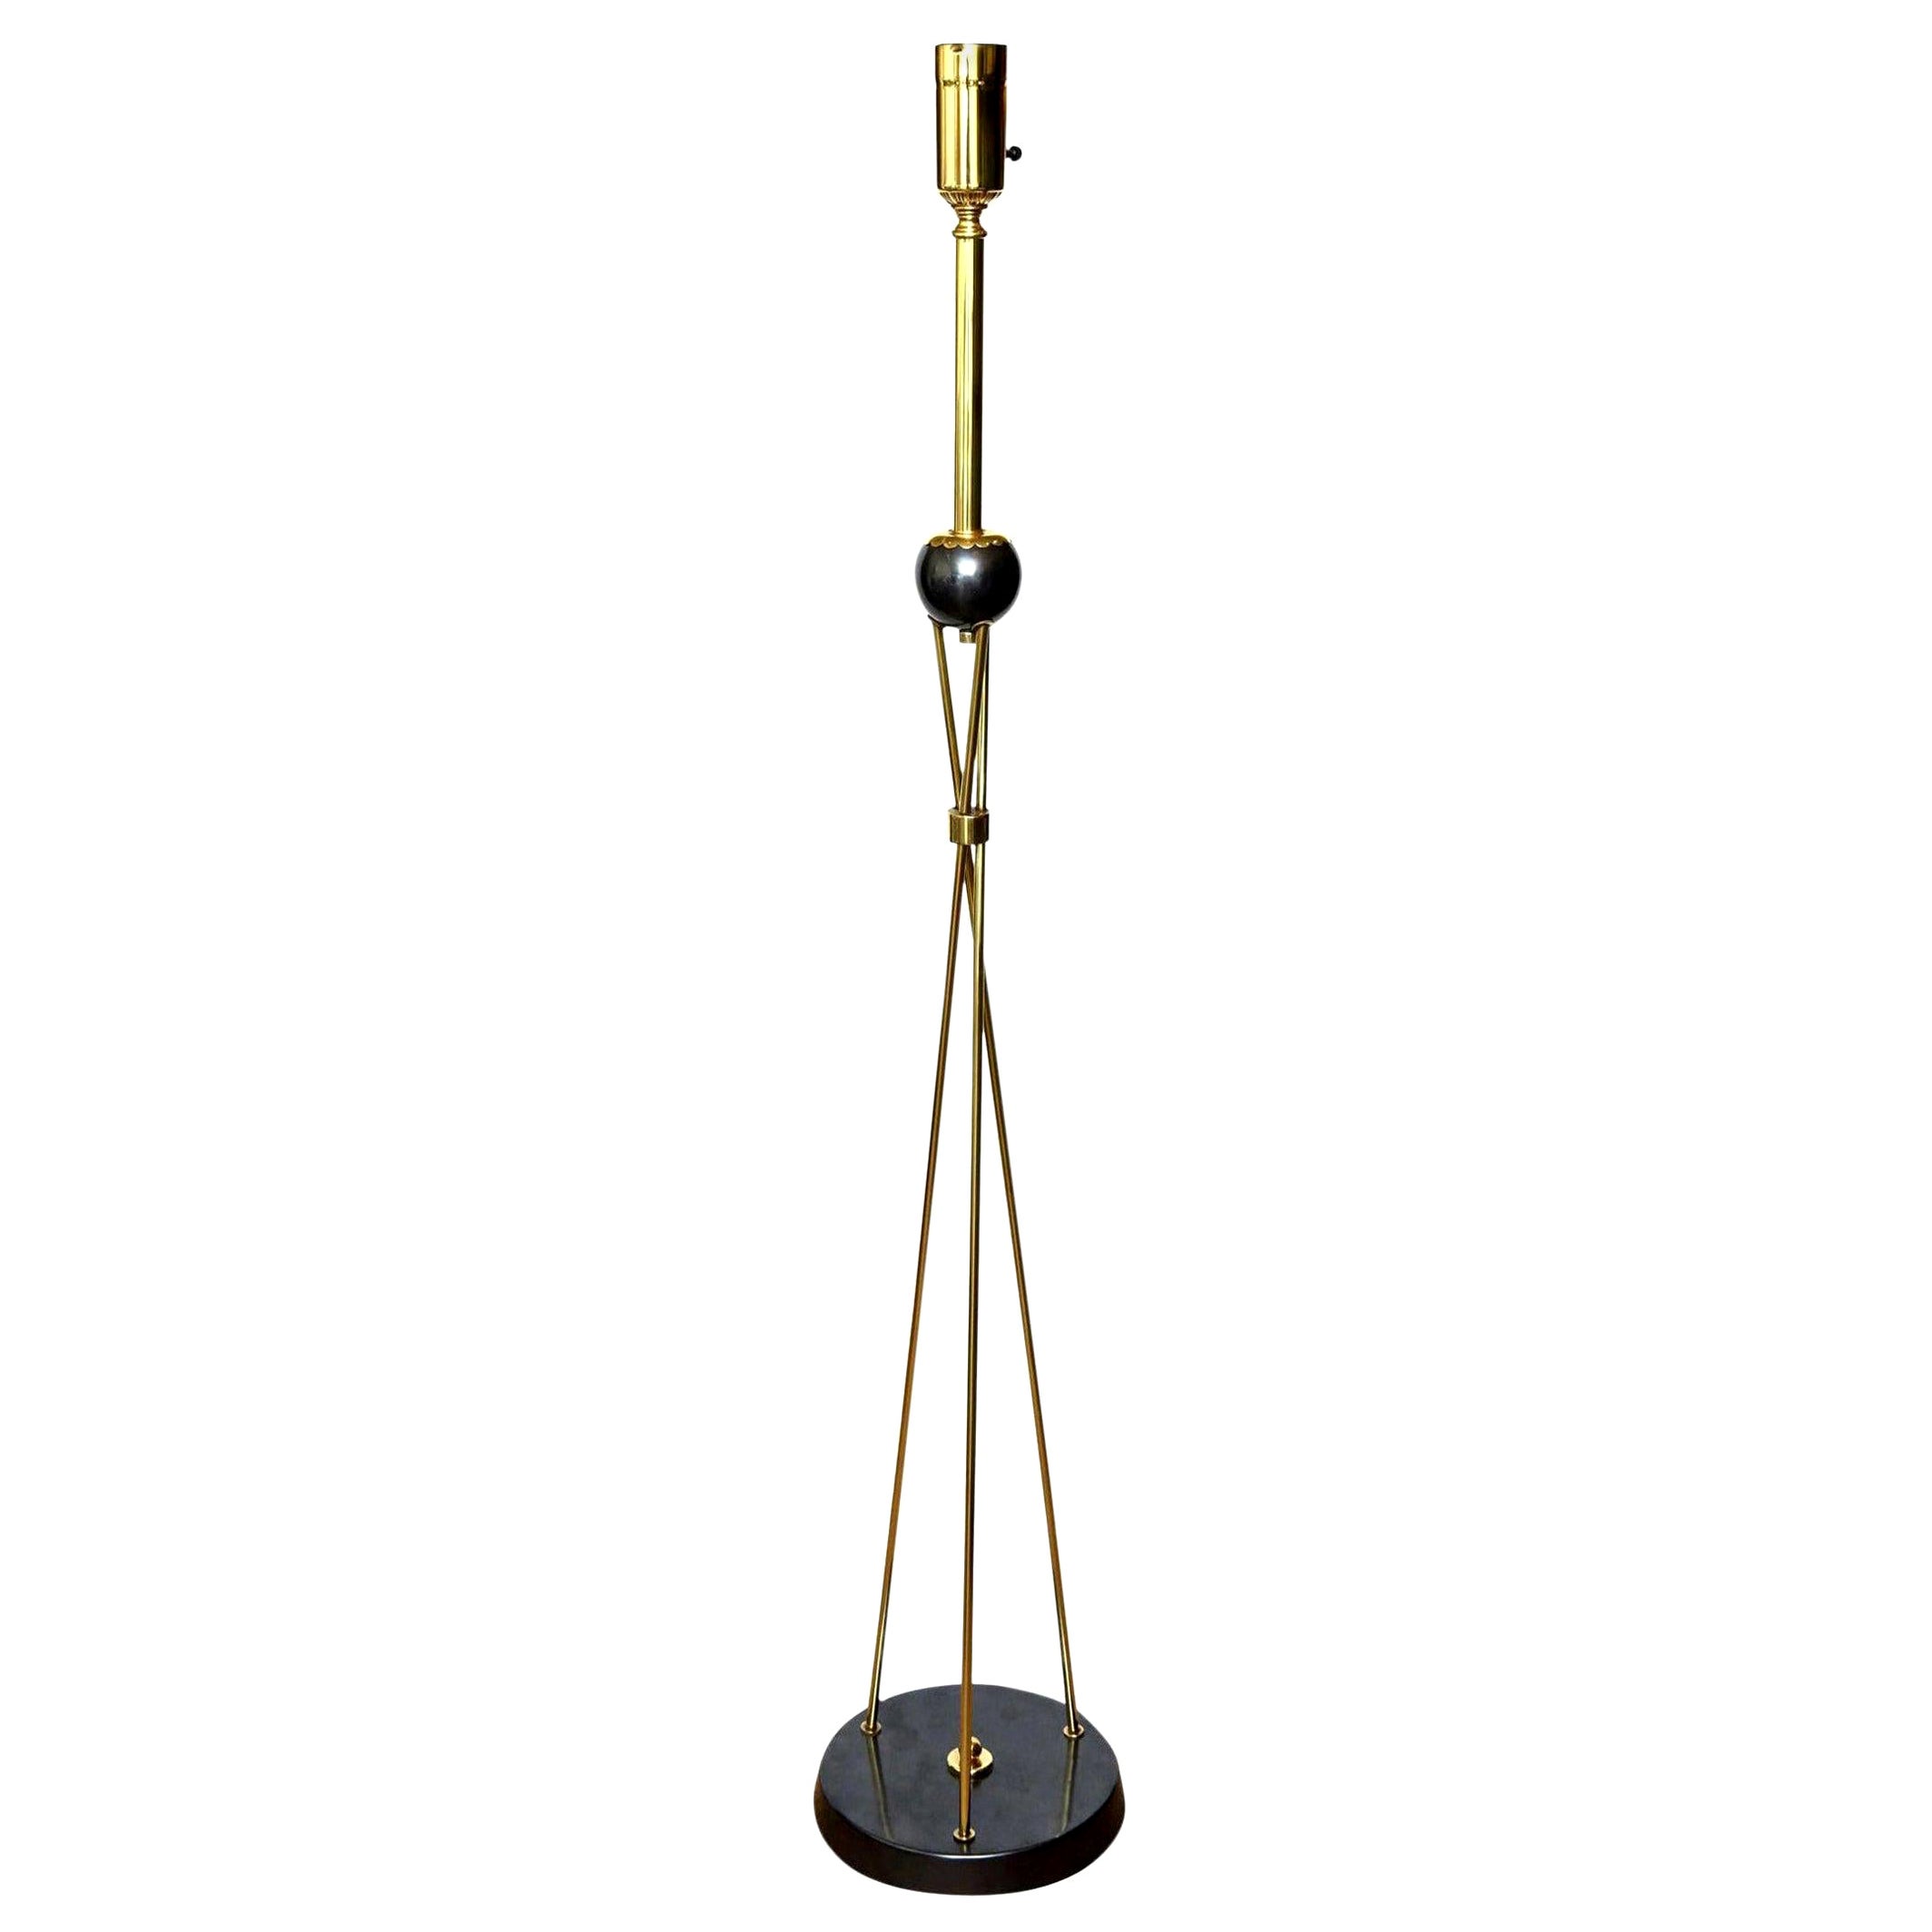 Brass and Gun Metal Restored Floor Lamp Style of Parzinger Mid-Century Modern For Sale